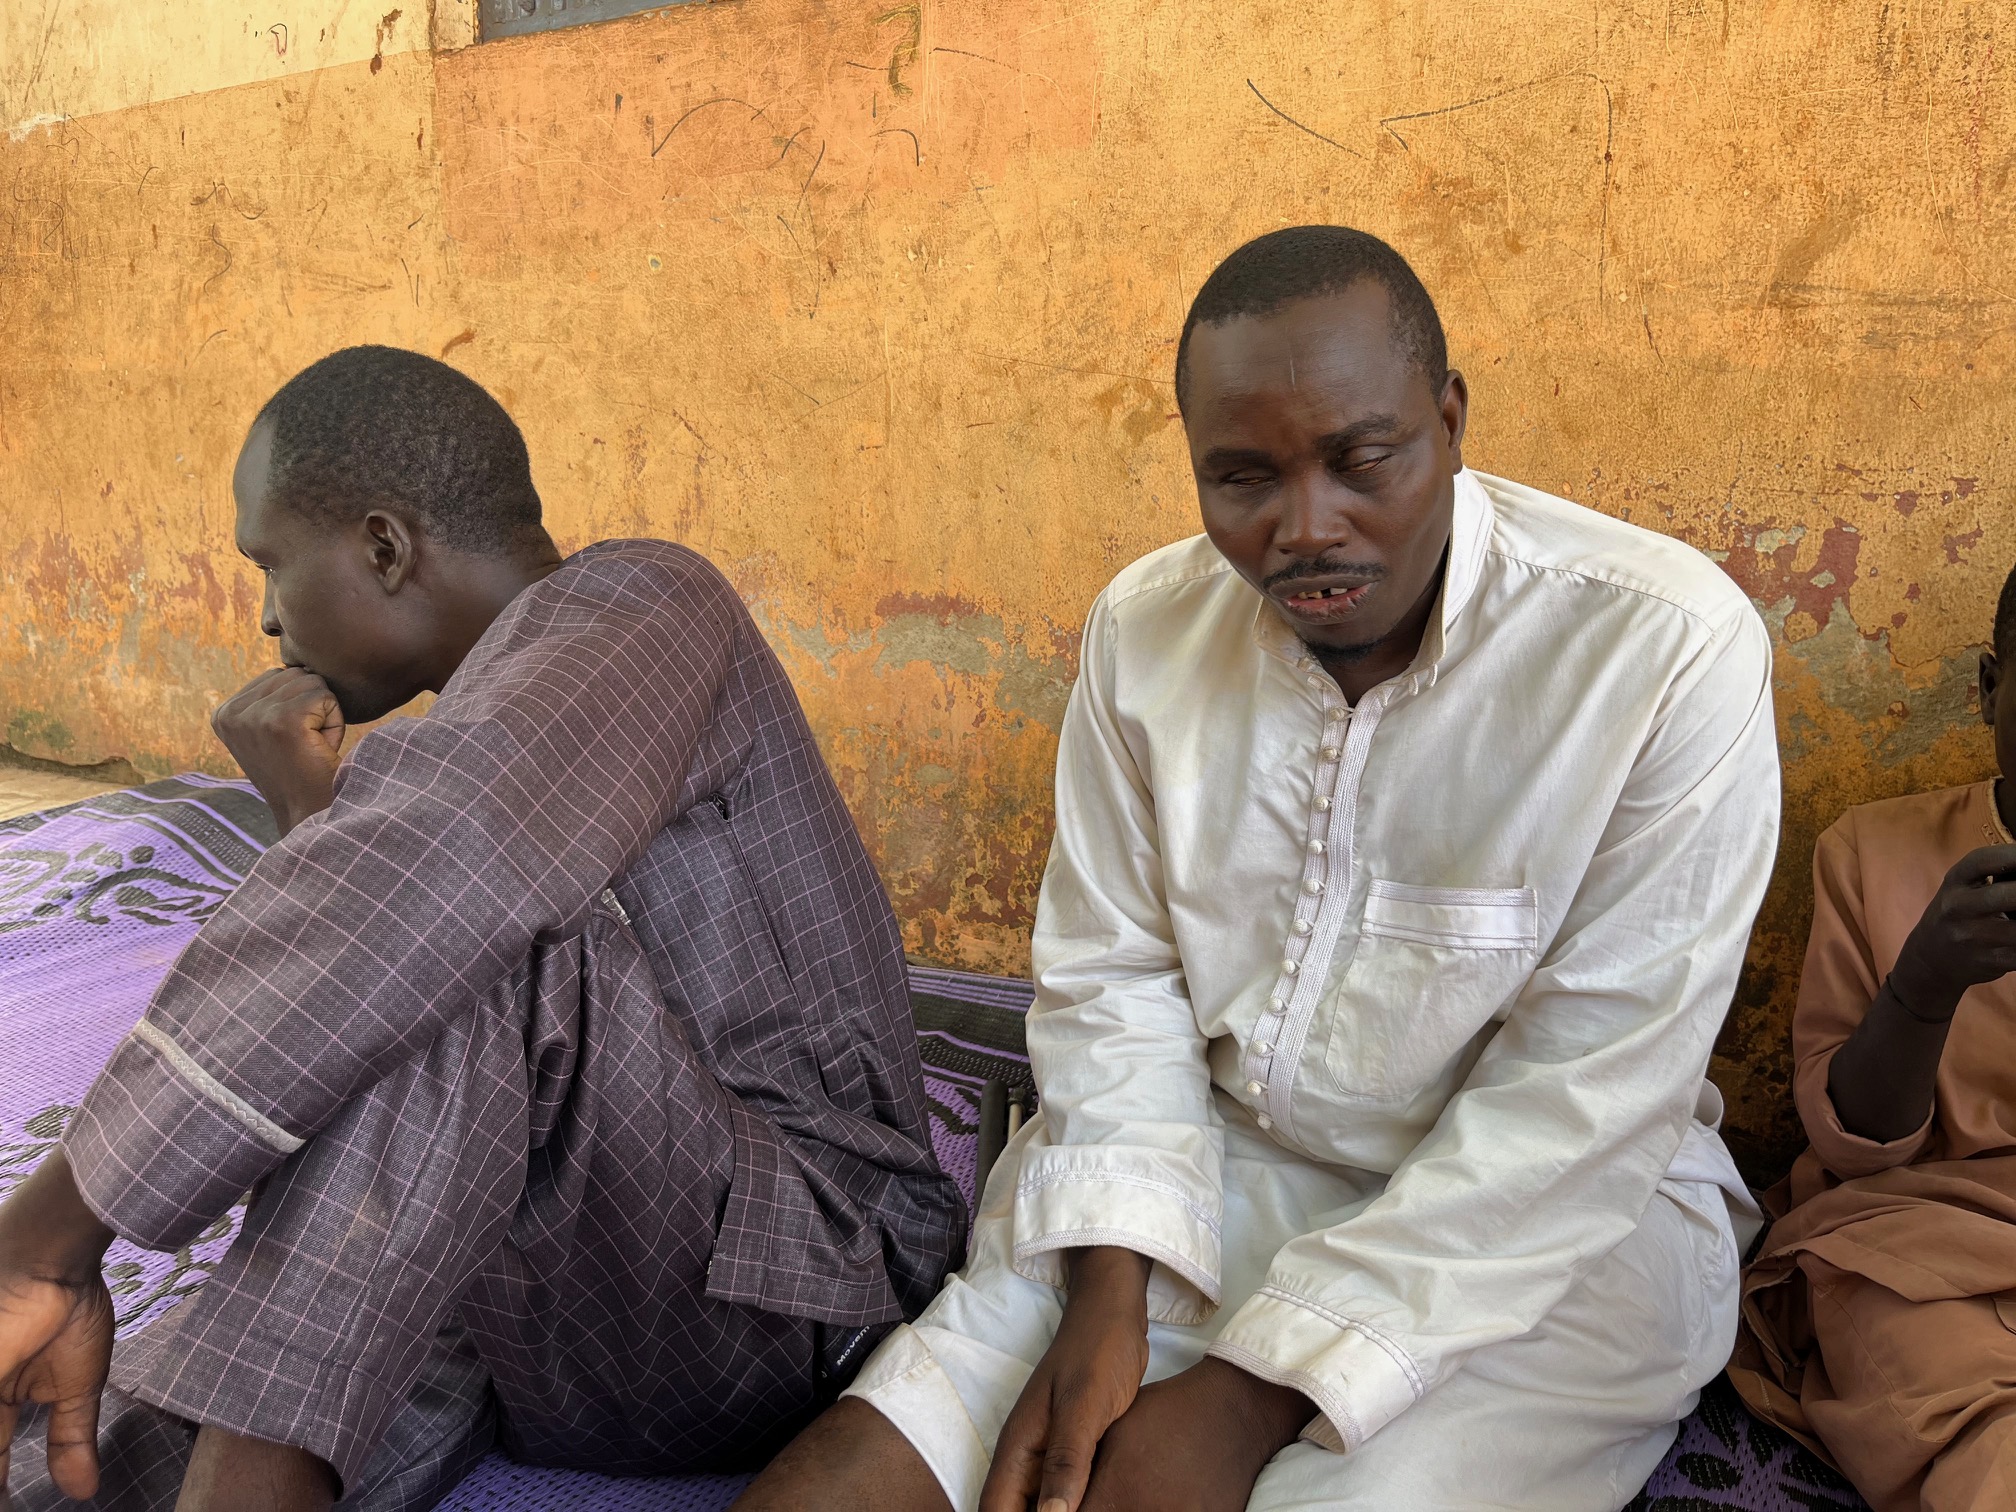 Aliyu (R) sitting with Habib, his friend (L). Photo credit: Claire Mom/TheCable